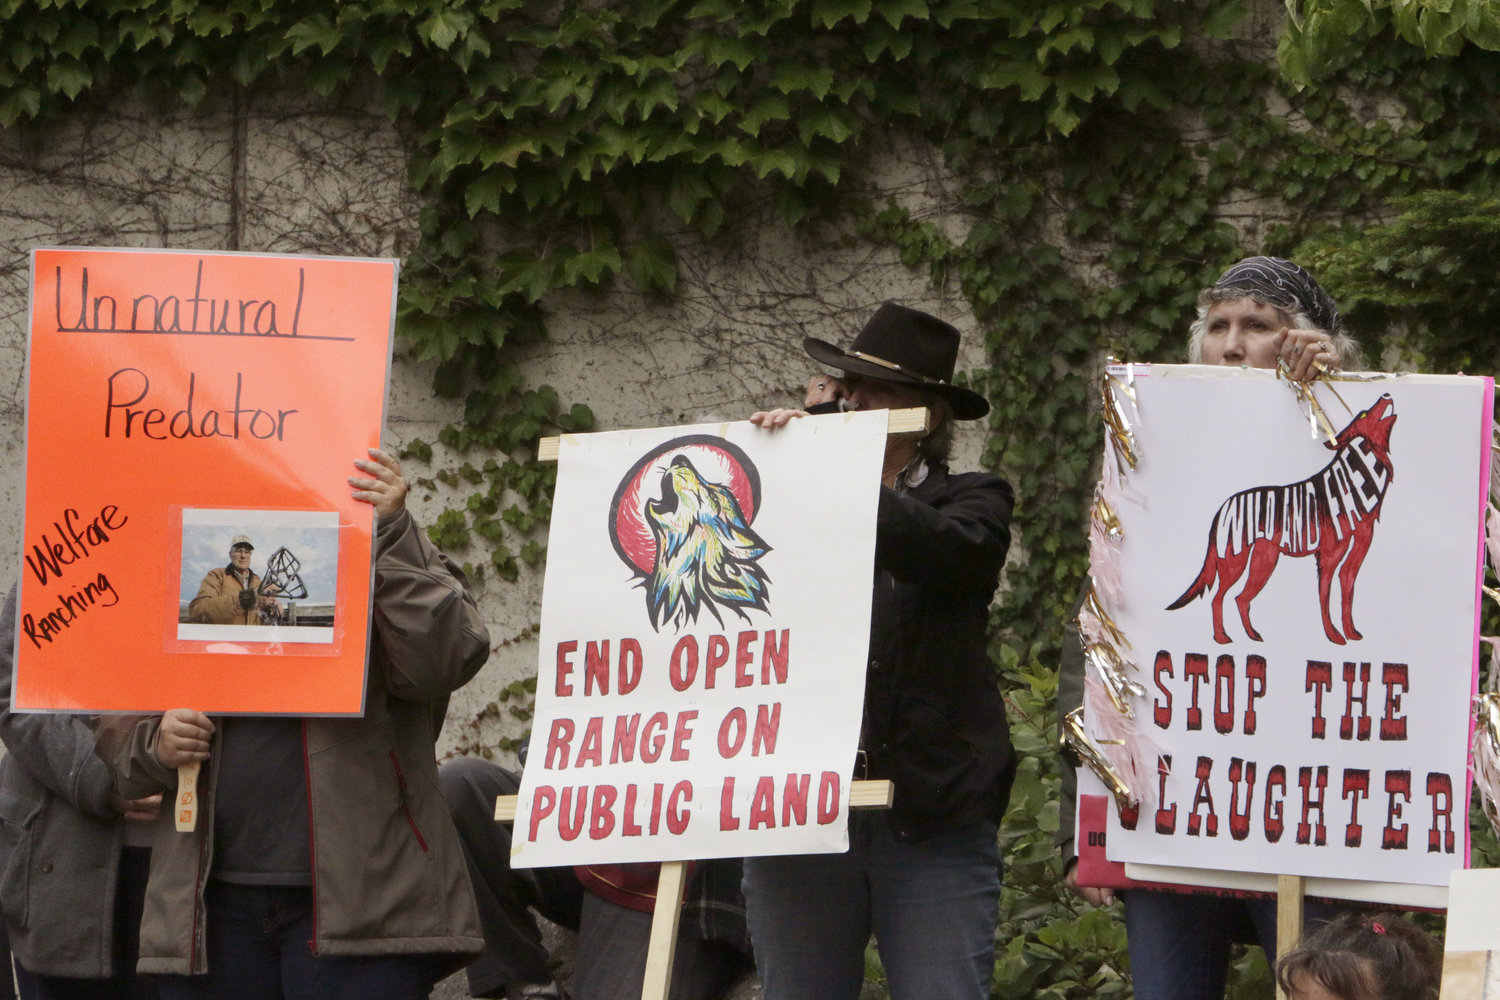 Opponents of the state's decision to eradicate a wolf pack in order to protect cattle protest outside of the Washington Department of Fish and Wildlife, Thursday, Sept. 1, 2016, in Olympia, Wash. So far, six of the 11 members of the Profanity Peak pack have been killed. 